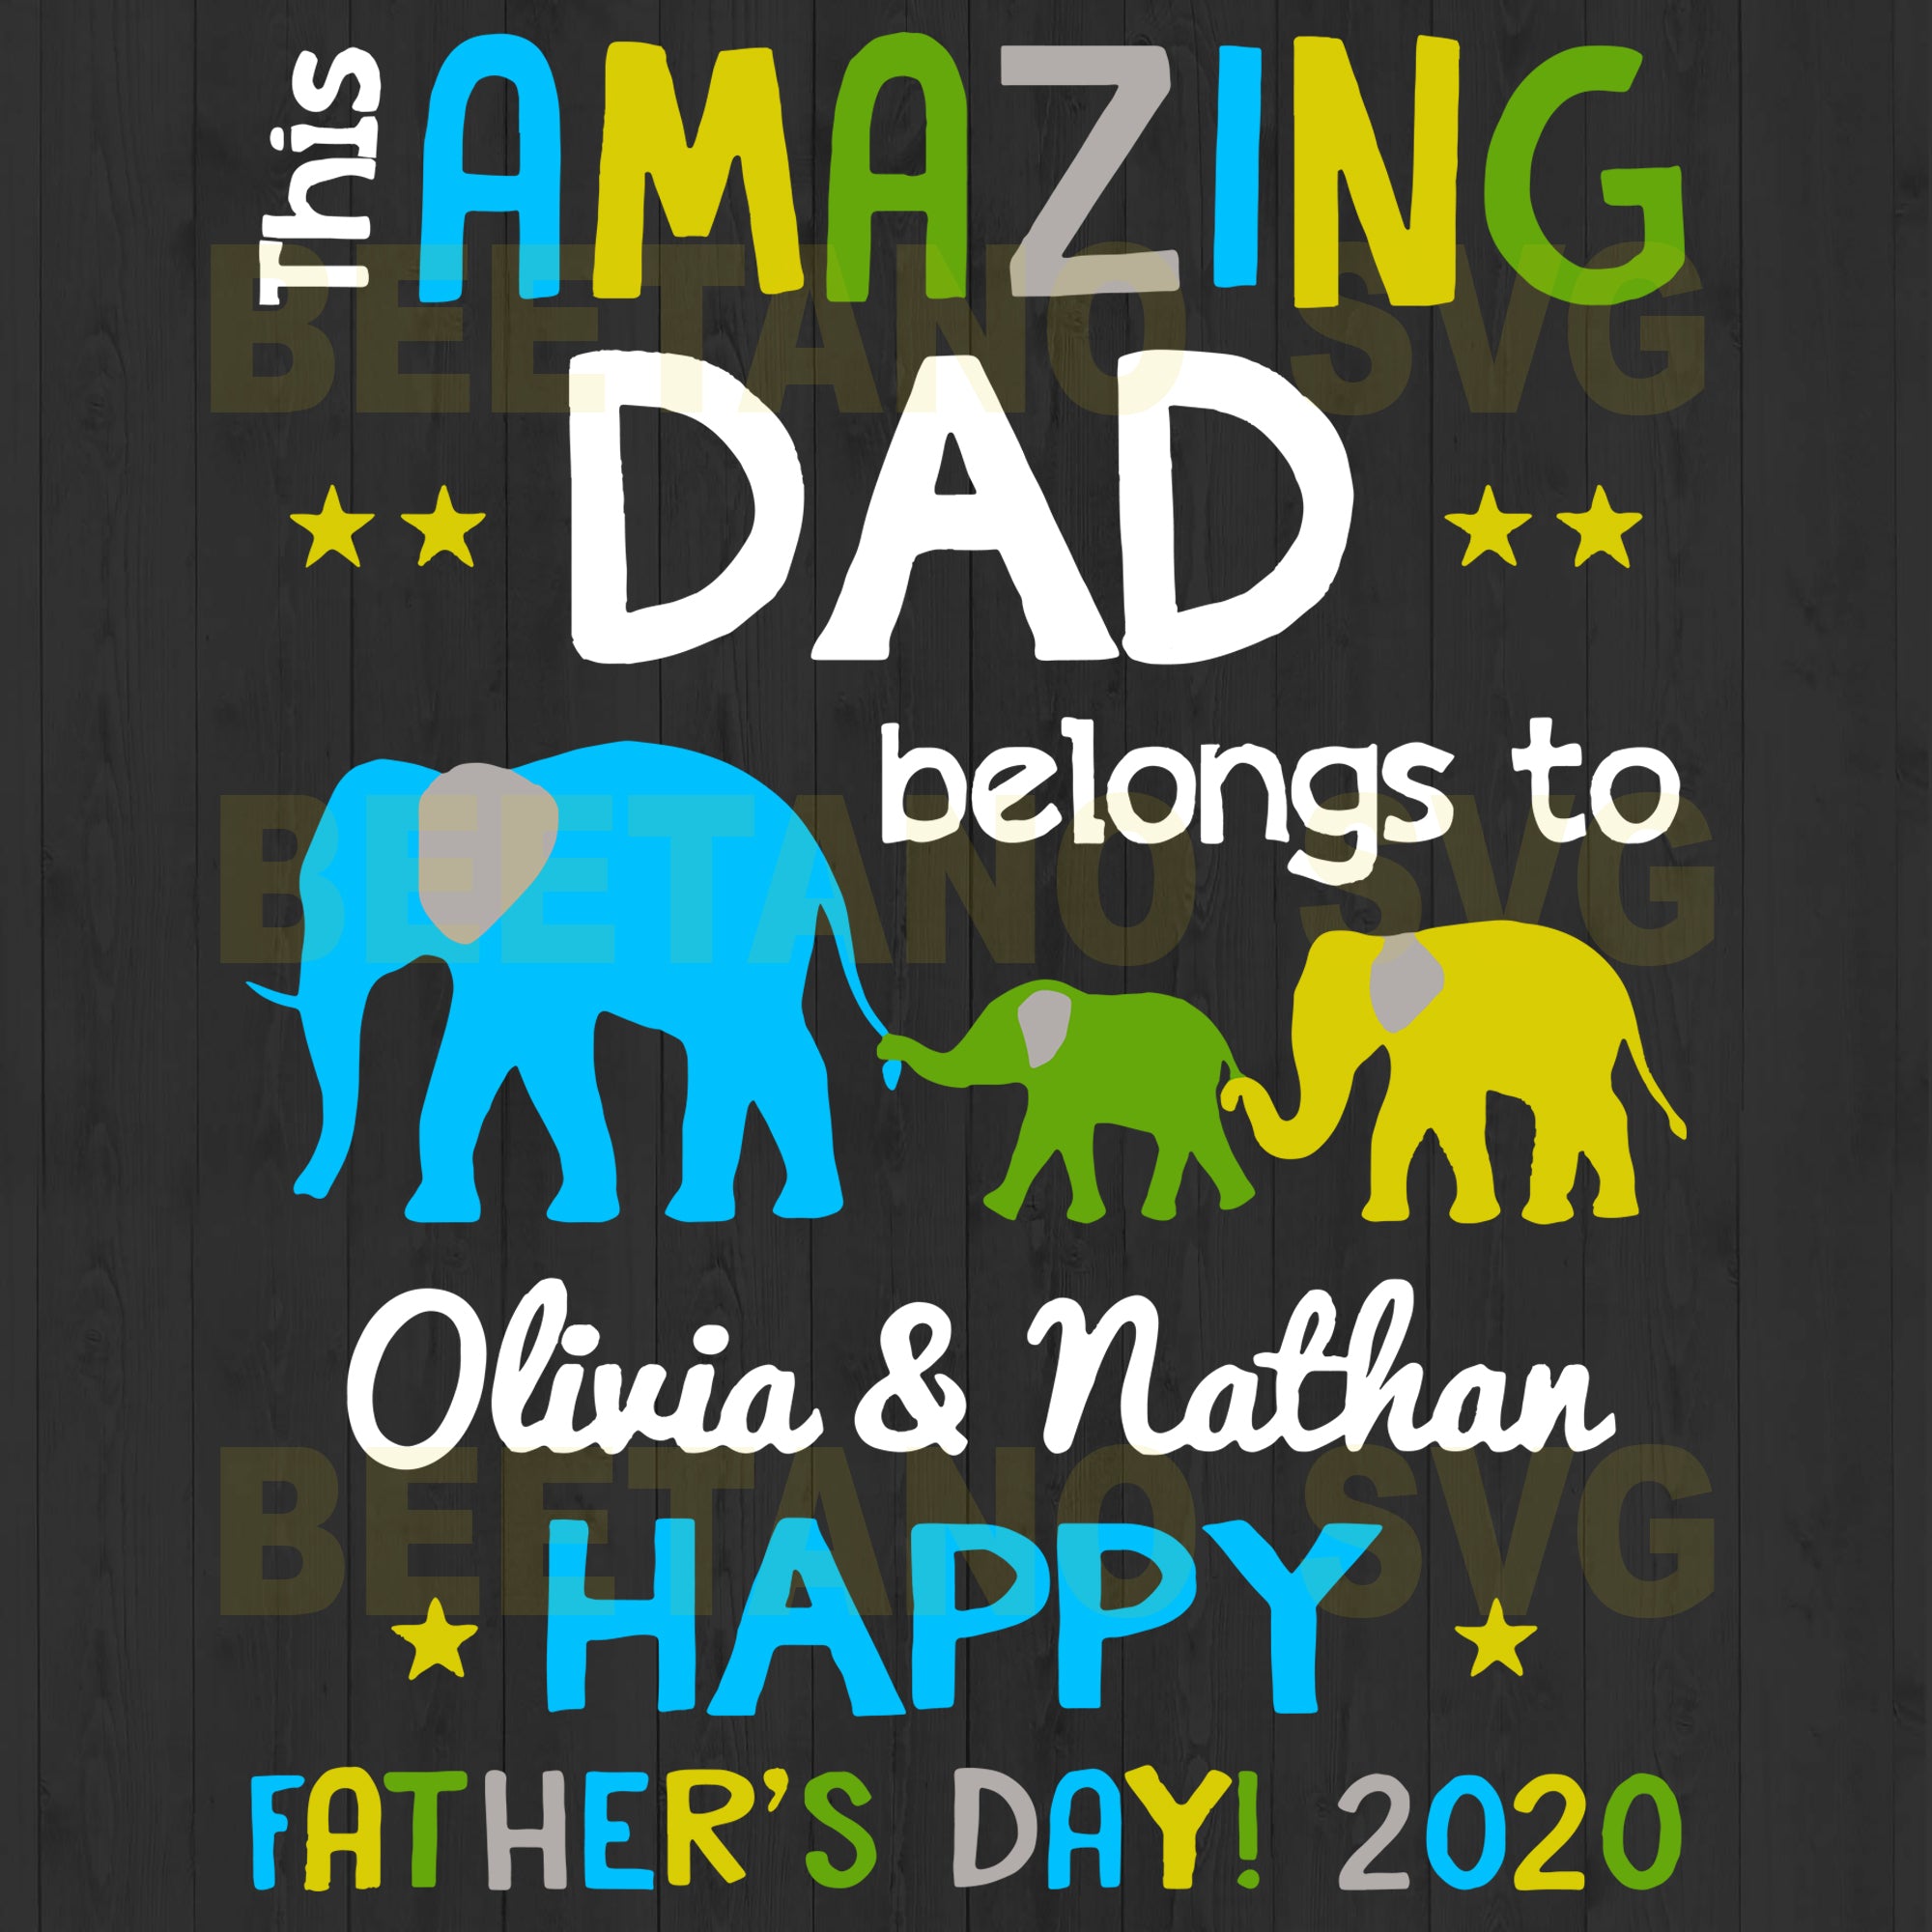 Download This Amazing Dad Belongs To Happy Father S Day Svg Files For Instant D